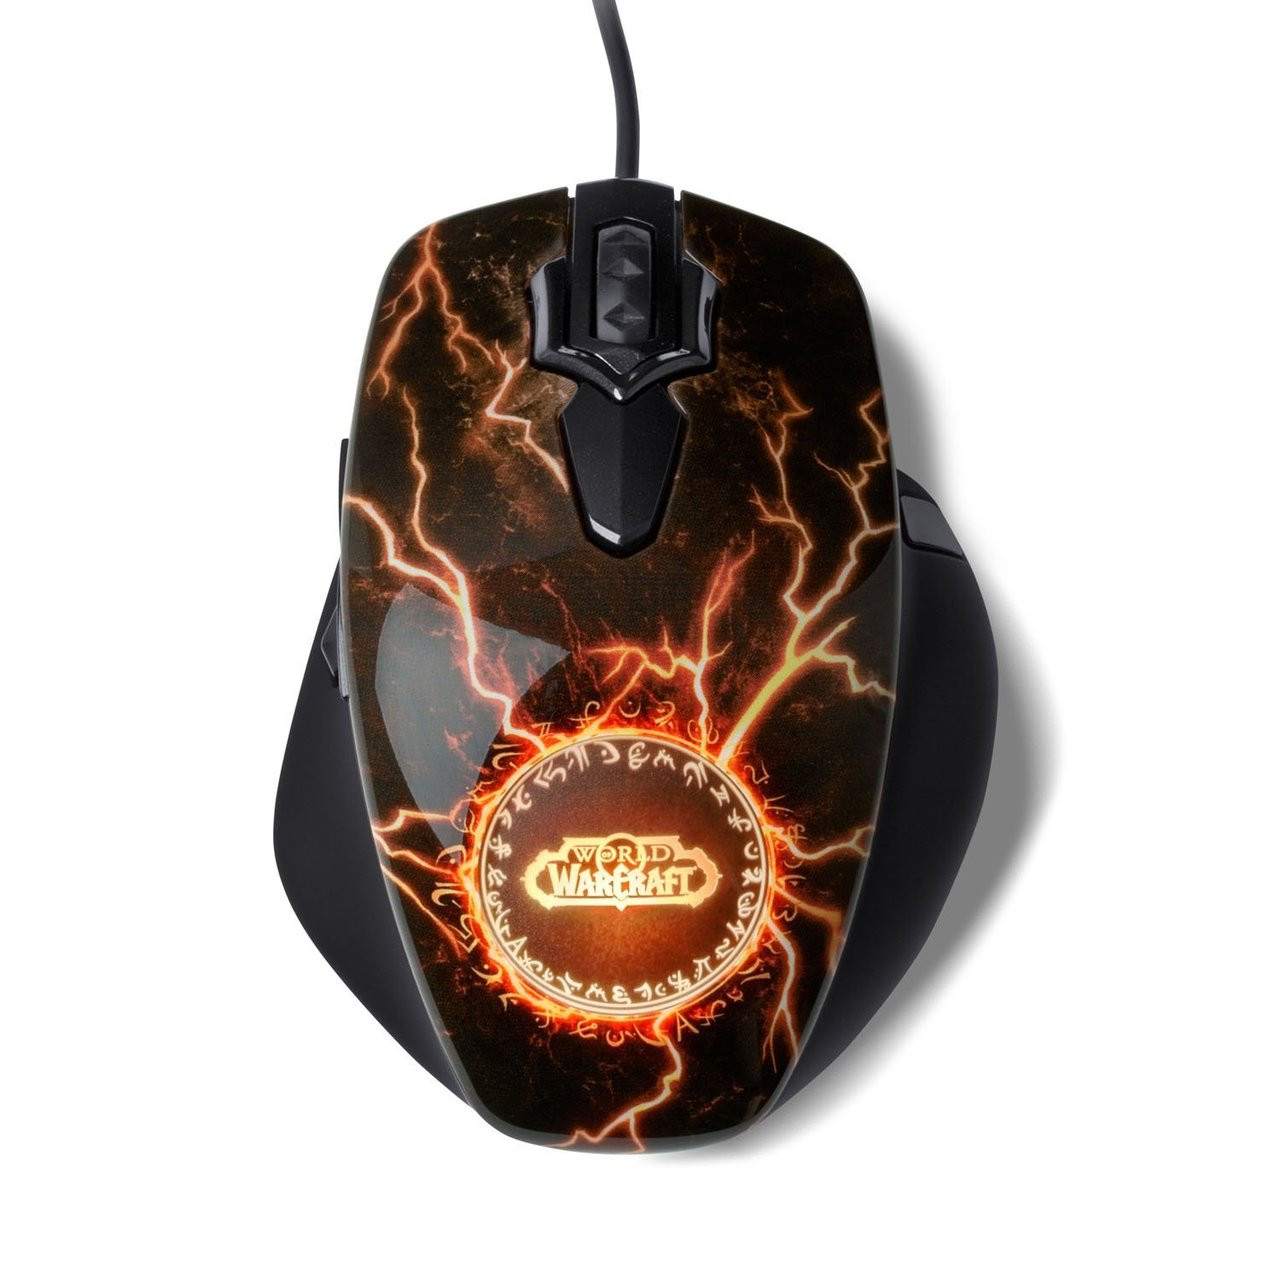 steelseries wow mouse drivers